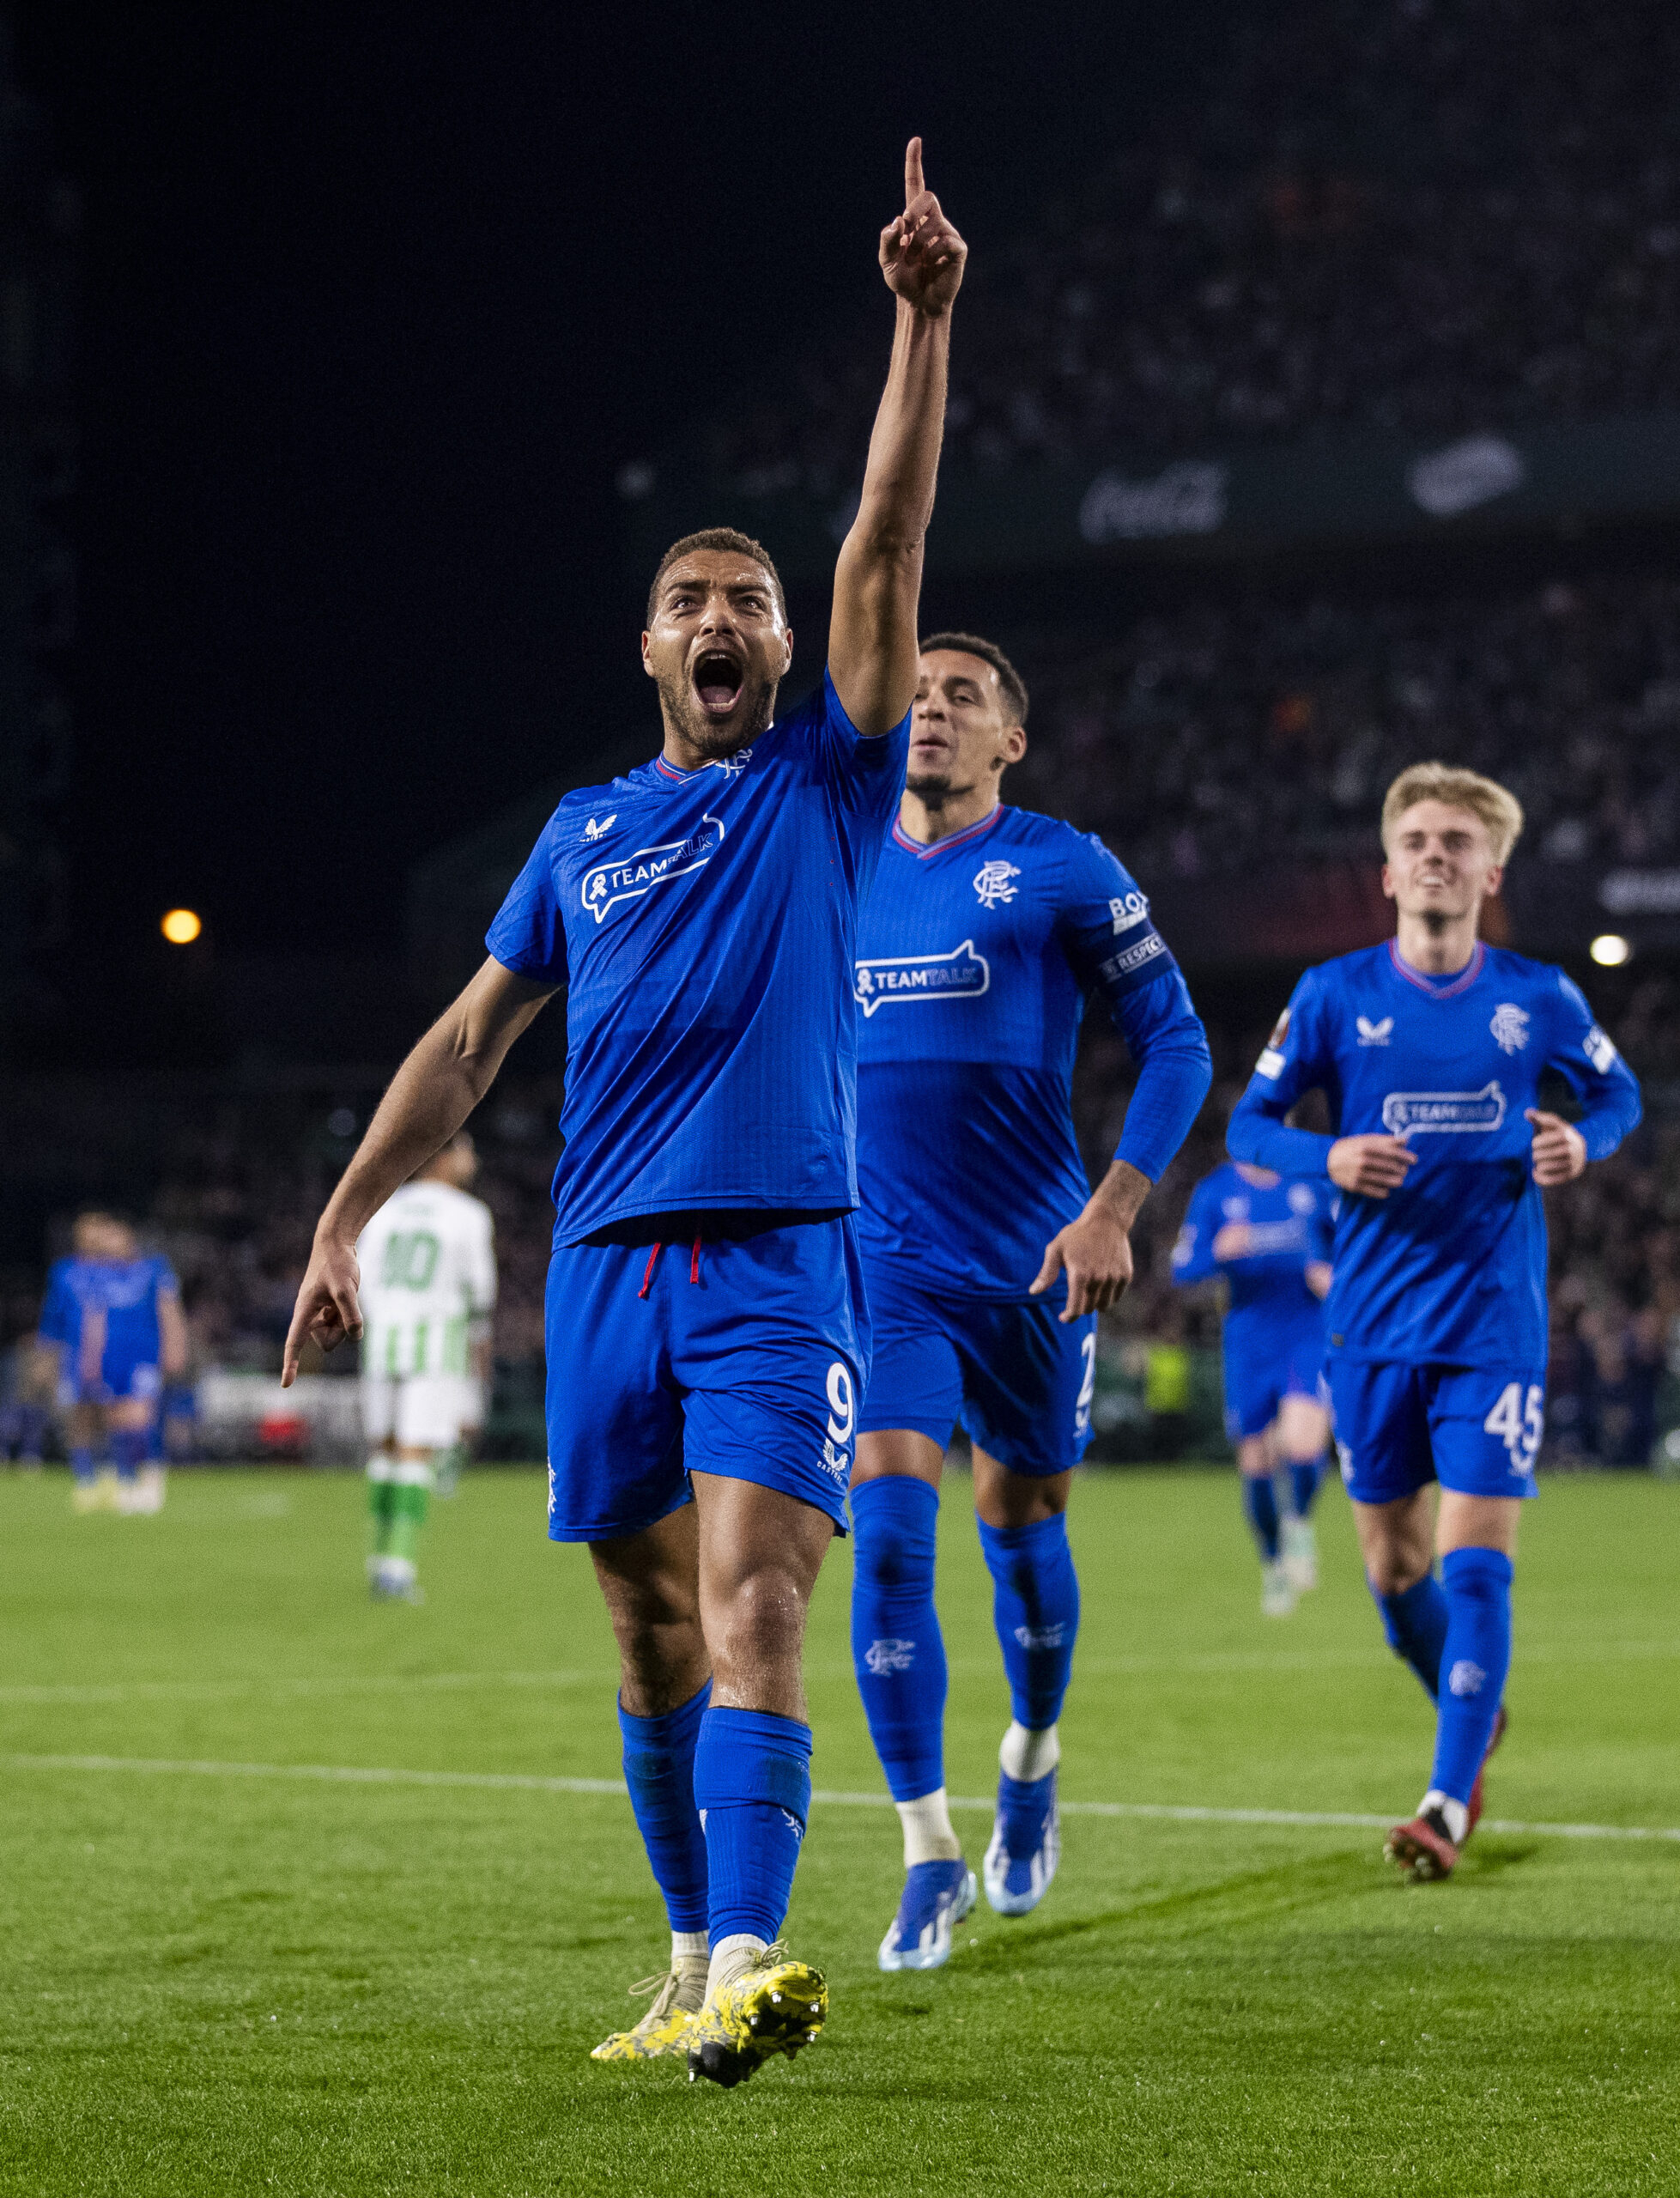 UEL: Cyriel Dessers assists, scores to help Rangers beat Sadiq's Real Betis